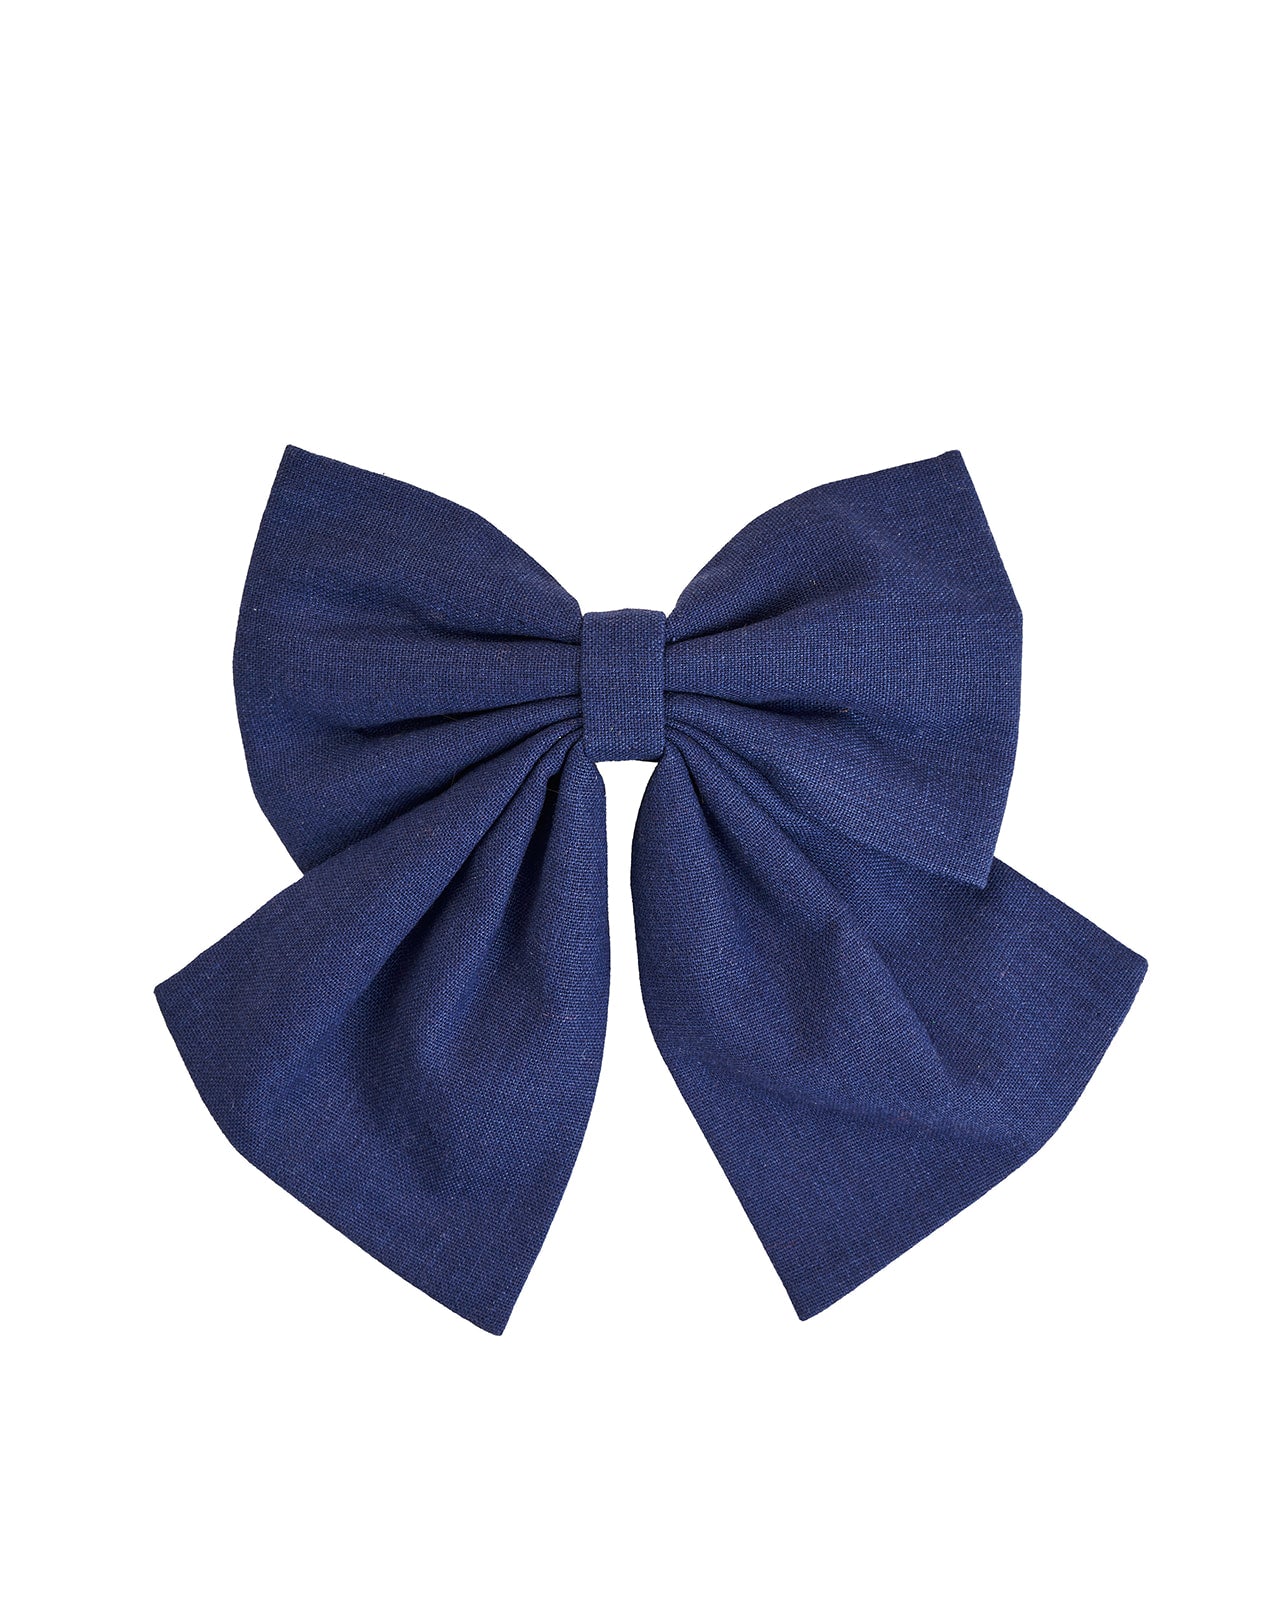 Chelsea Linen Hair bows - IN STOCK NOW!